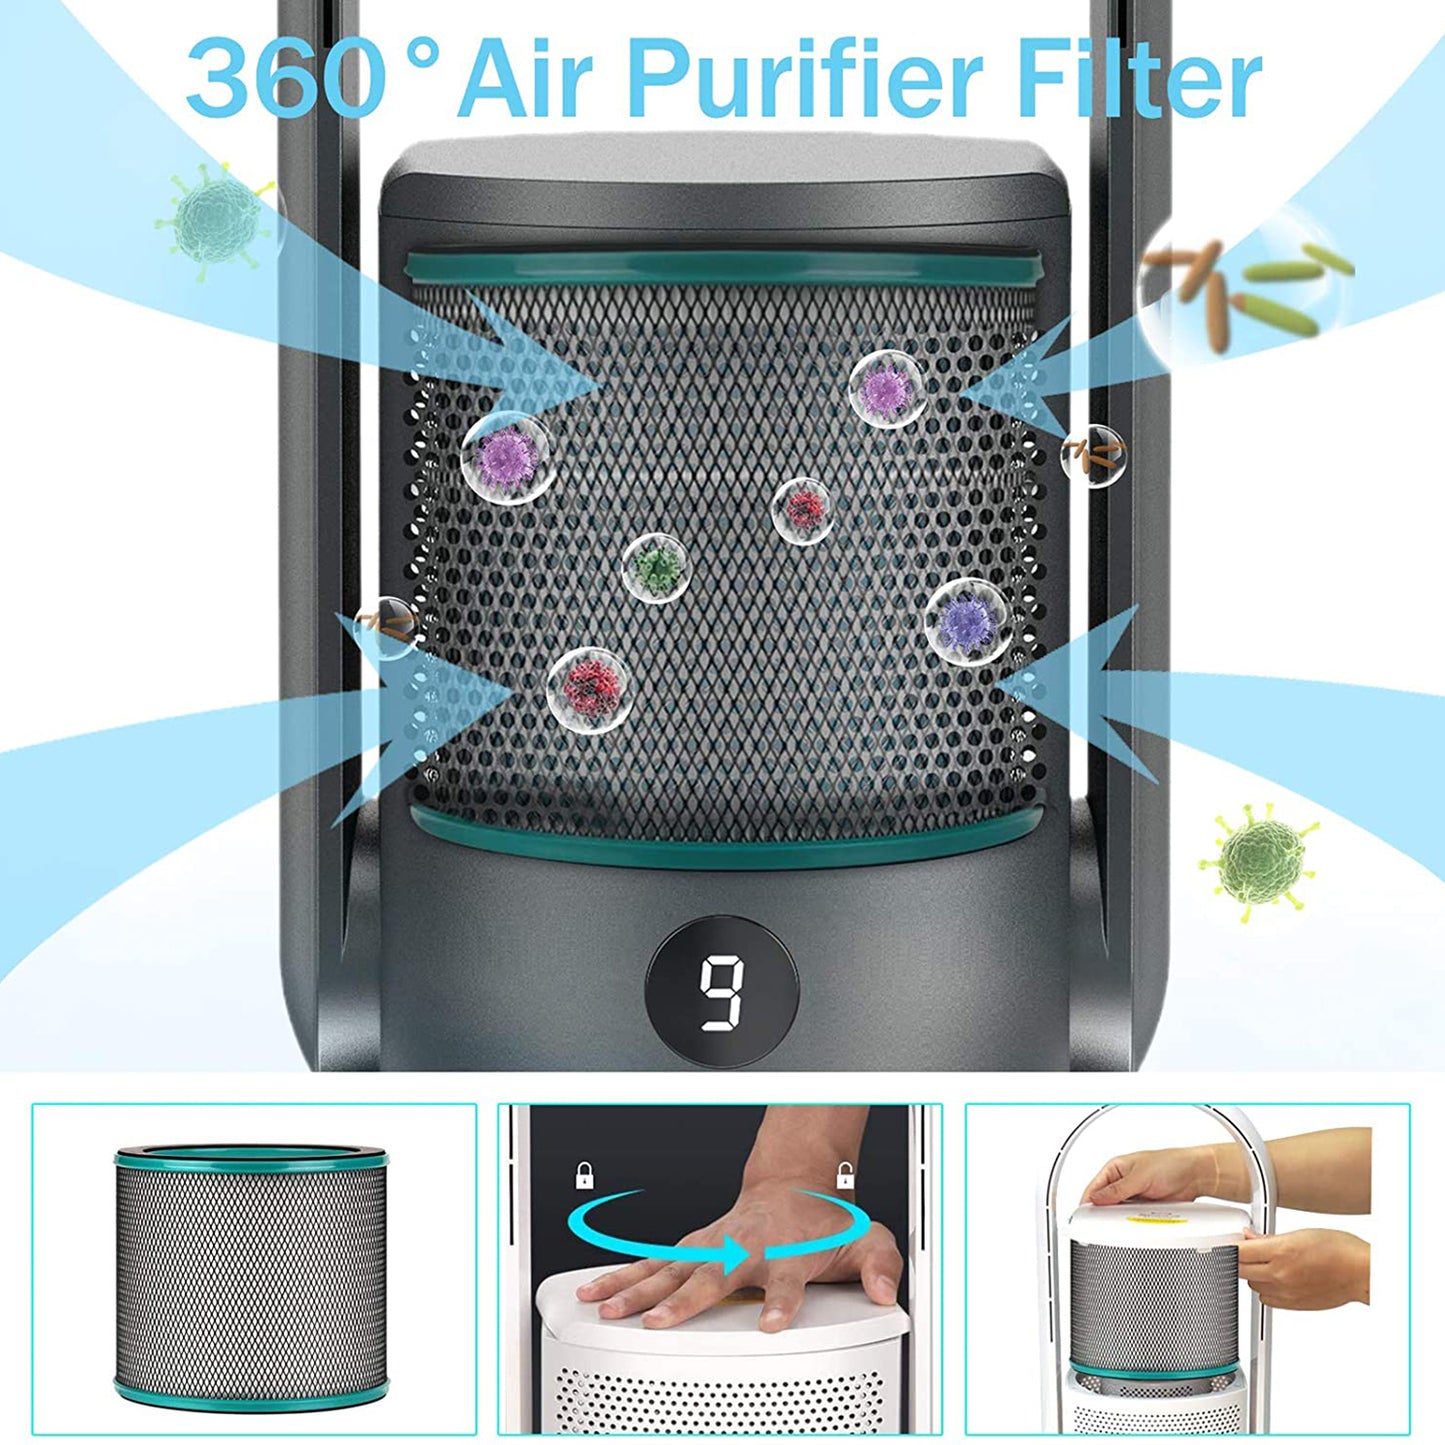 ULTTY Bladeless Tower Fan and Air Purifier in one, True HEPA Filter 99.97% Smoke Dust Pollen Dander, Oscillating Tower Fan with Remote Control R021,White/Black